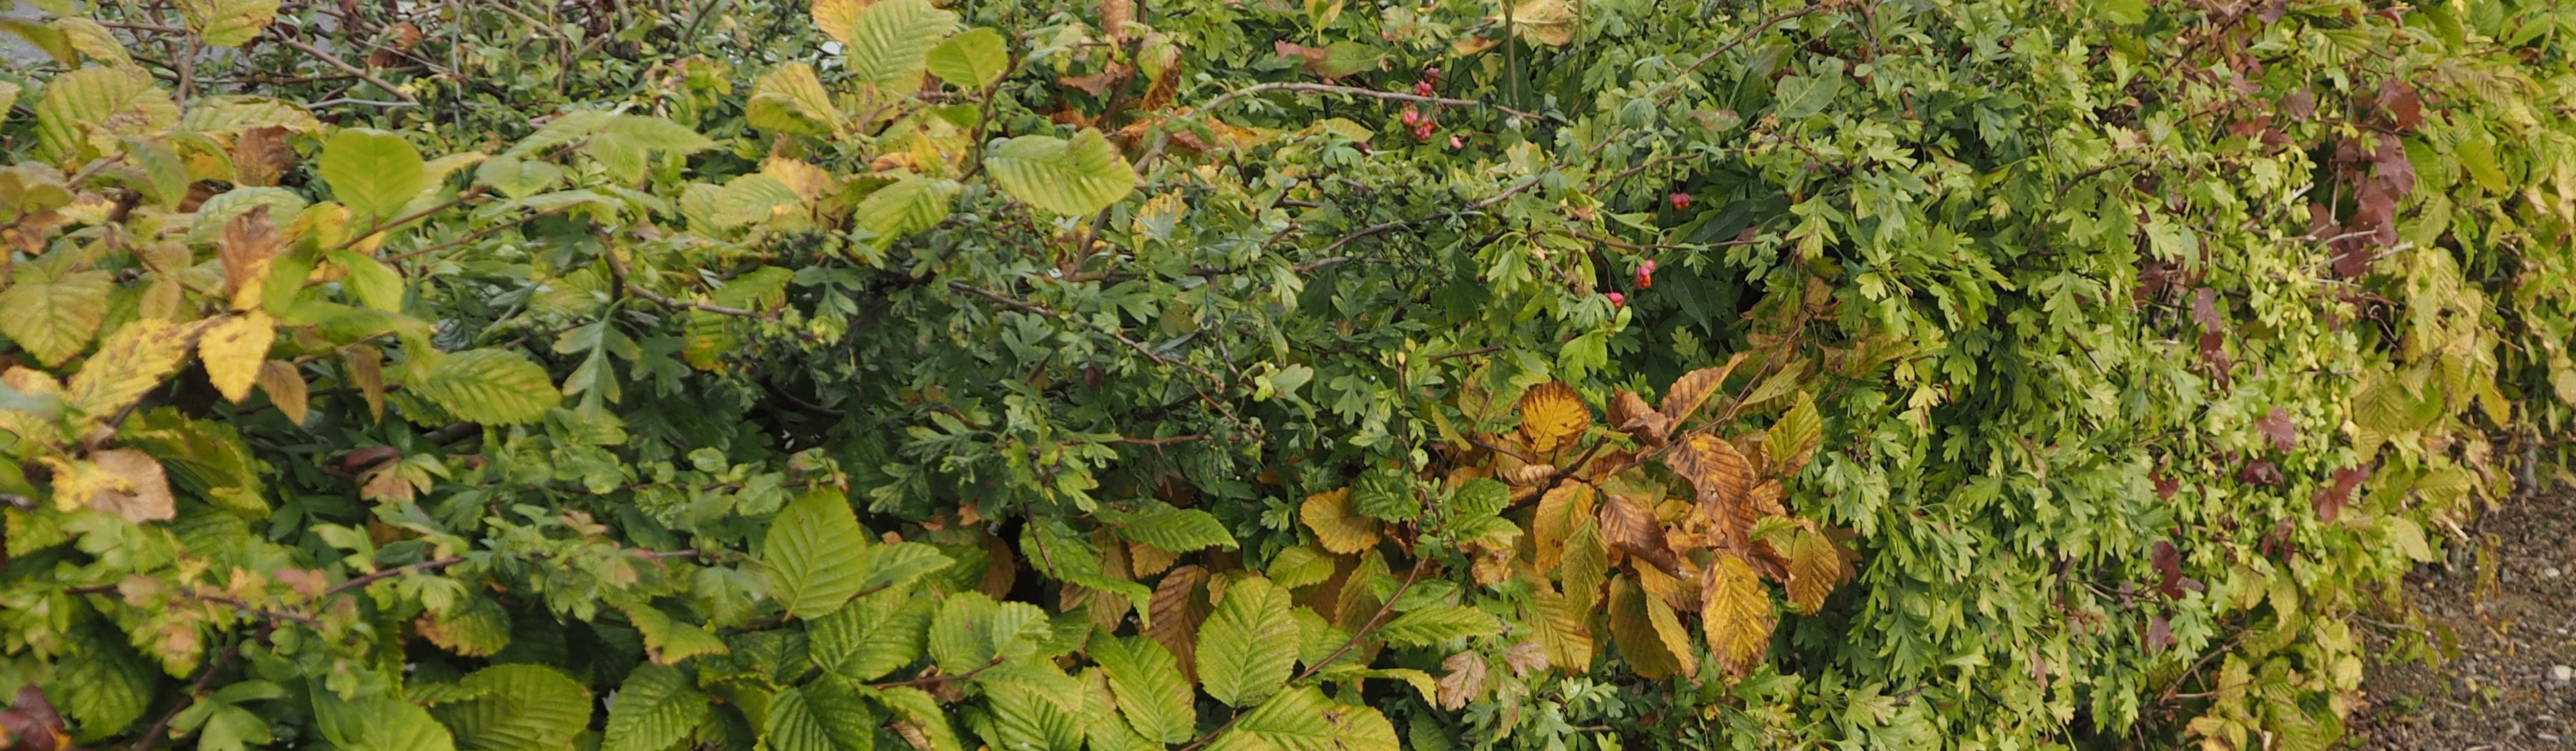 Hedging - Plants for a Mixed Hedge